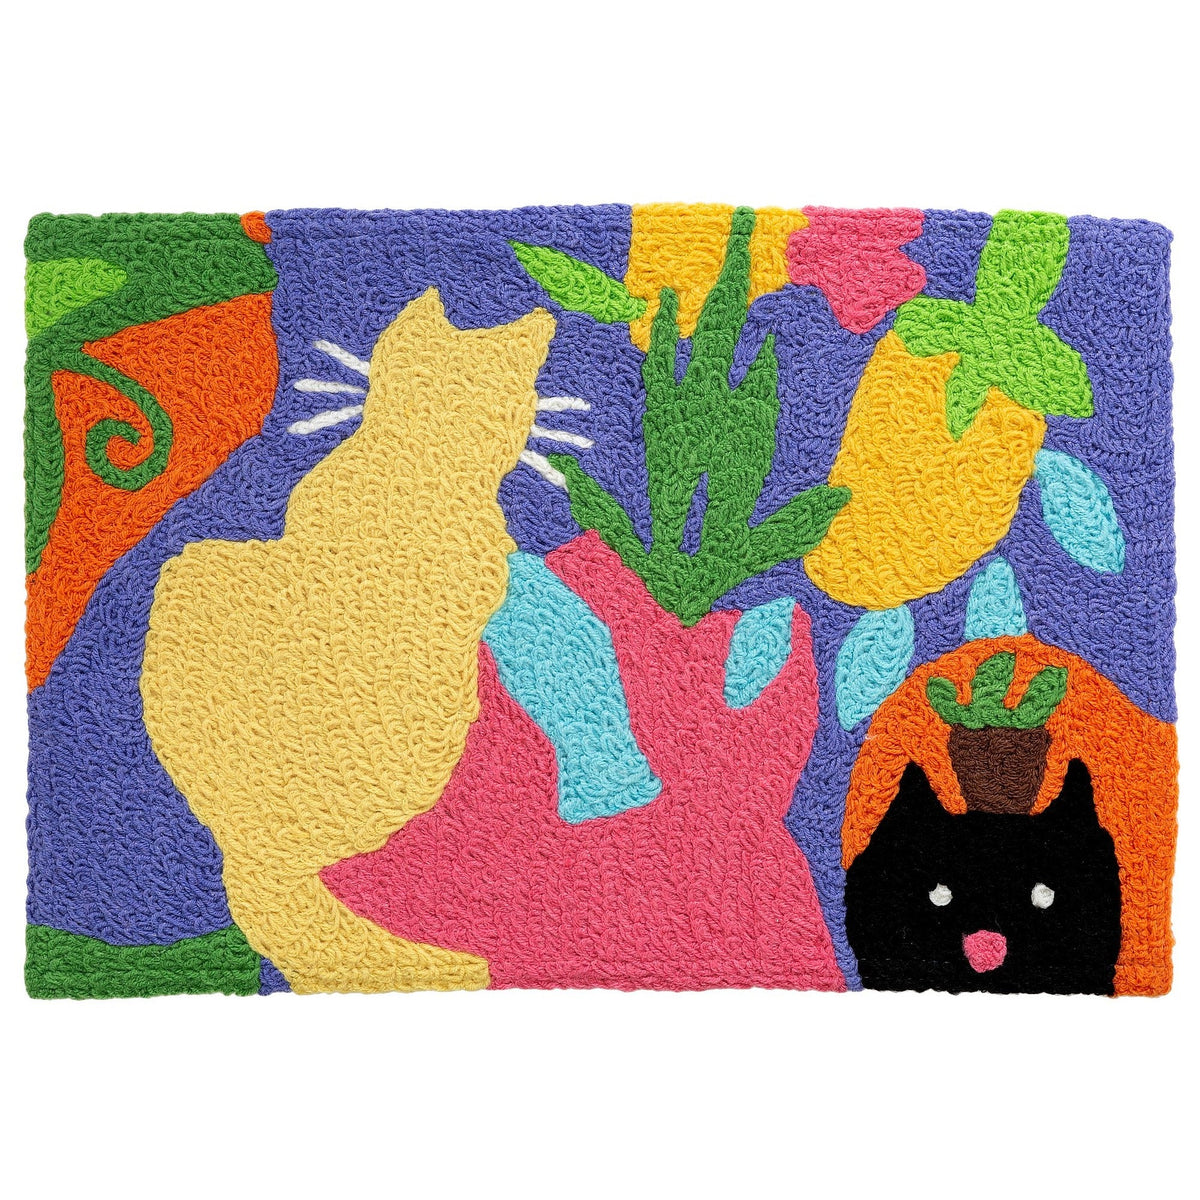 Best Cat Themed Rugs and Mats for your Home at The Great Cat Store